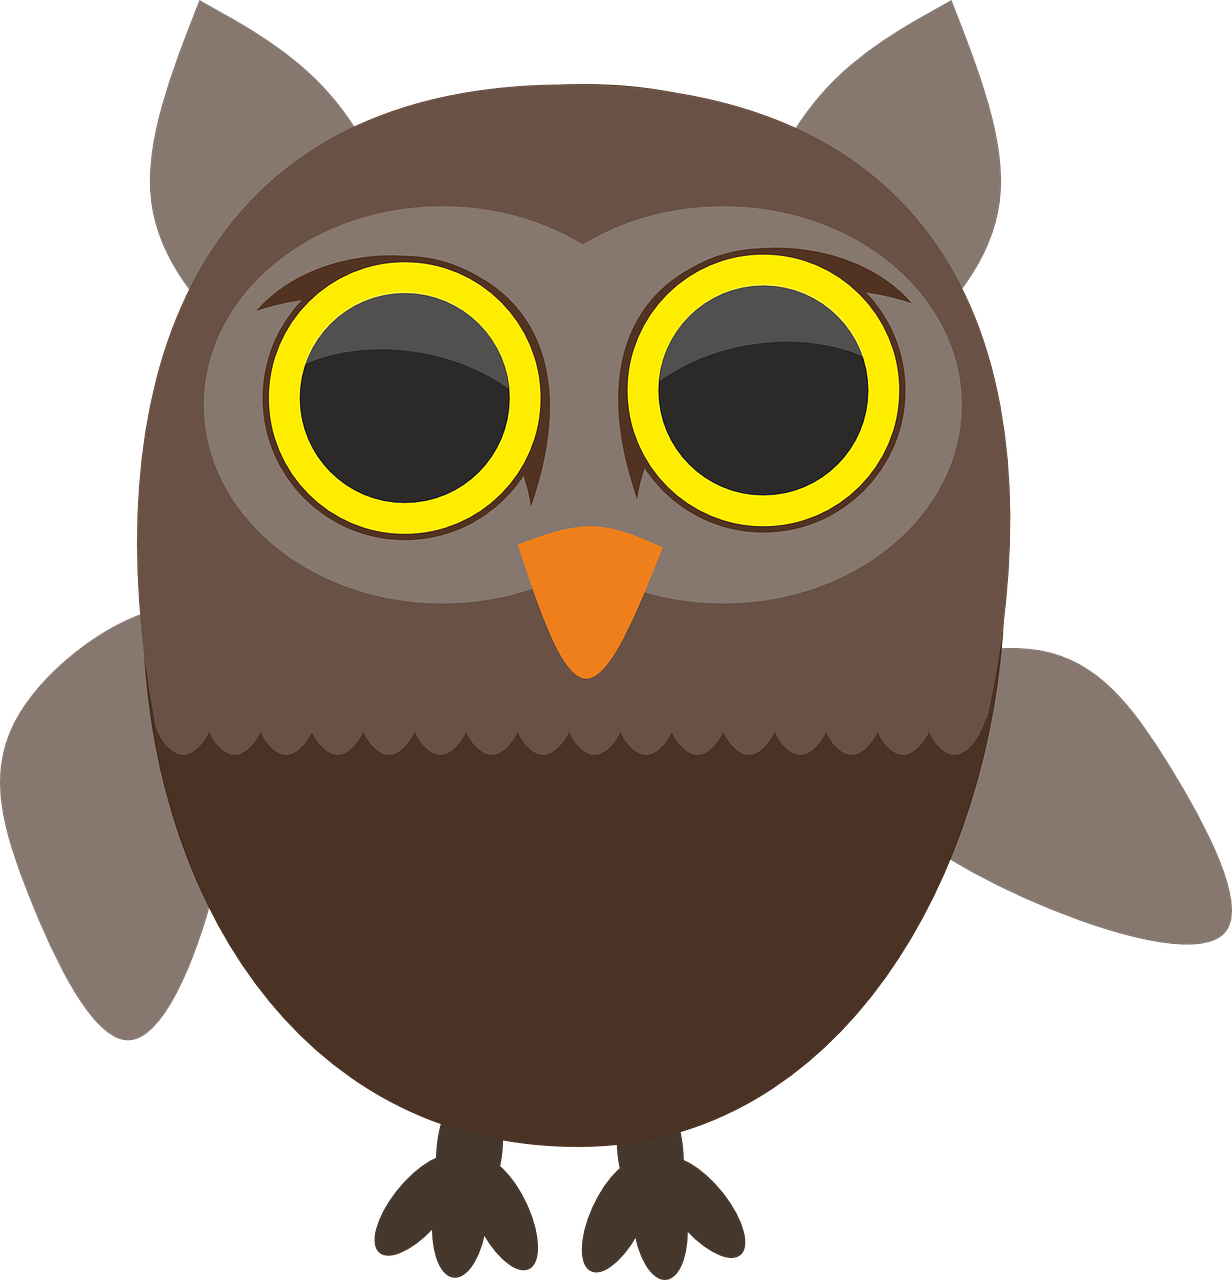 a cartoon owl with big yellow eyes, inspired by Nyuju Stumpy Brown, pixabay, mingei, thick dark glasses, style of titmouse animation, various posed, brown:-2